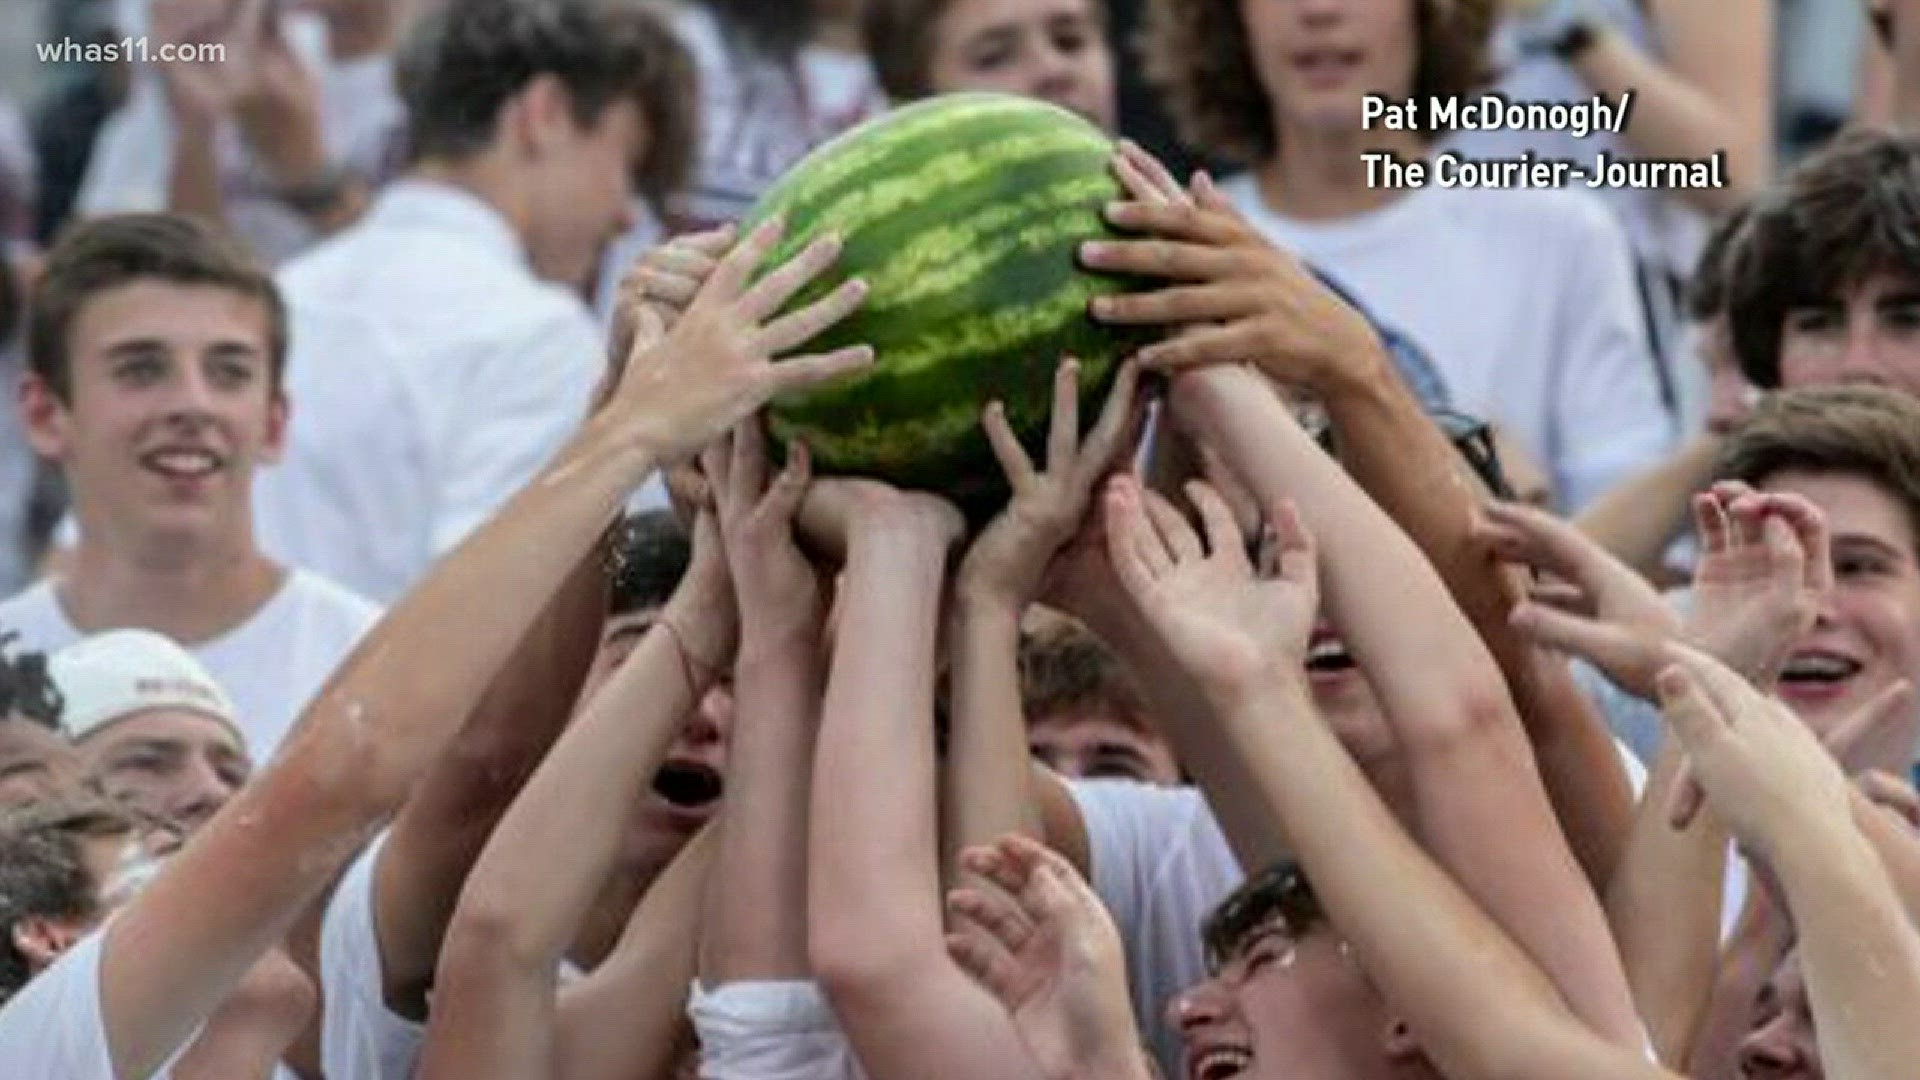 The watermelon controversy at a Jefferson County school happened as discussions about its racial equity policy are happening, so the timing is good for learning.